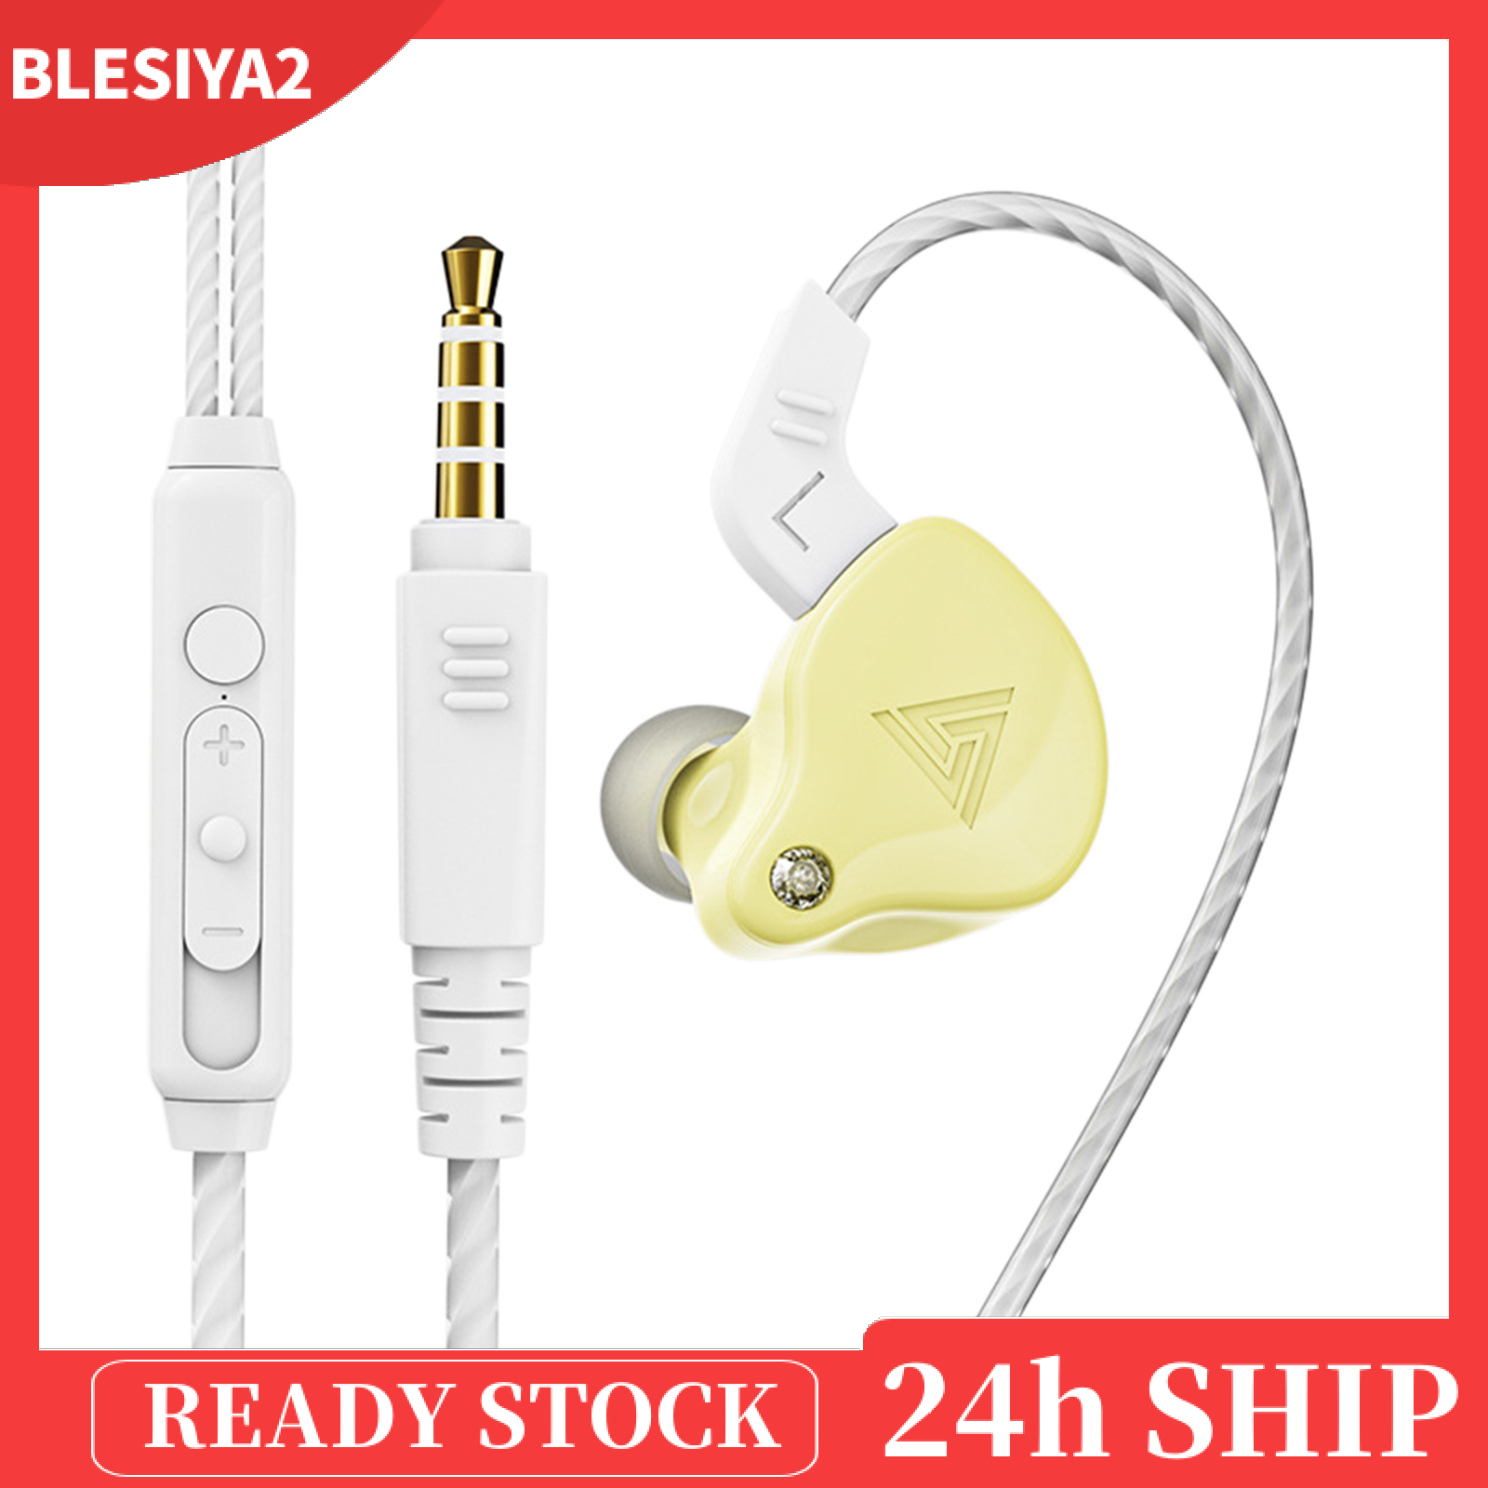 [BLESIYA2]Earphones Wired Earbuds Enhanced HiFi Stereo Sound Noise Isolating 3.5mm Headphone in Ear with Microphone Clearer Calls, Lightweight